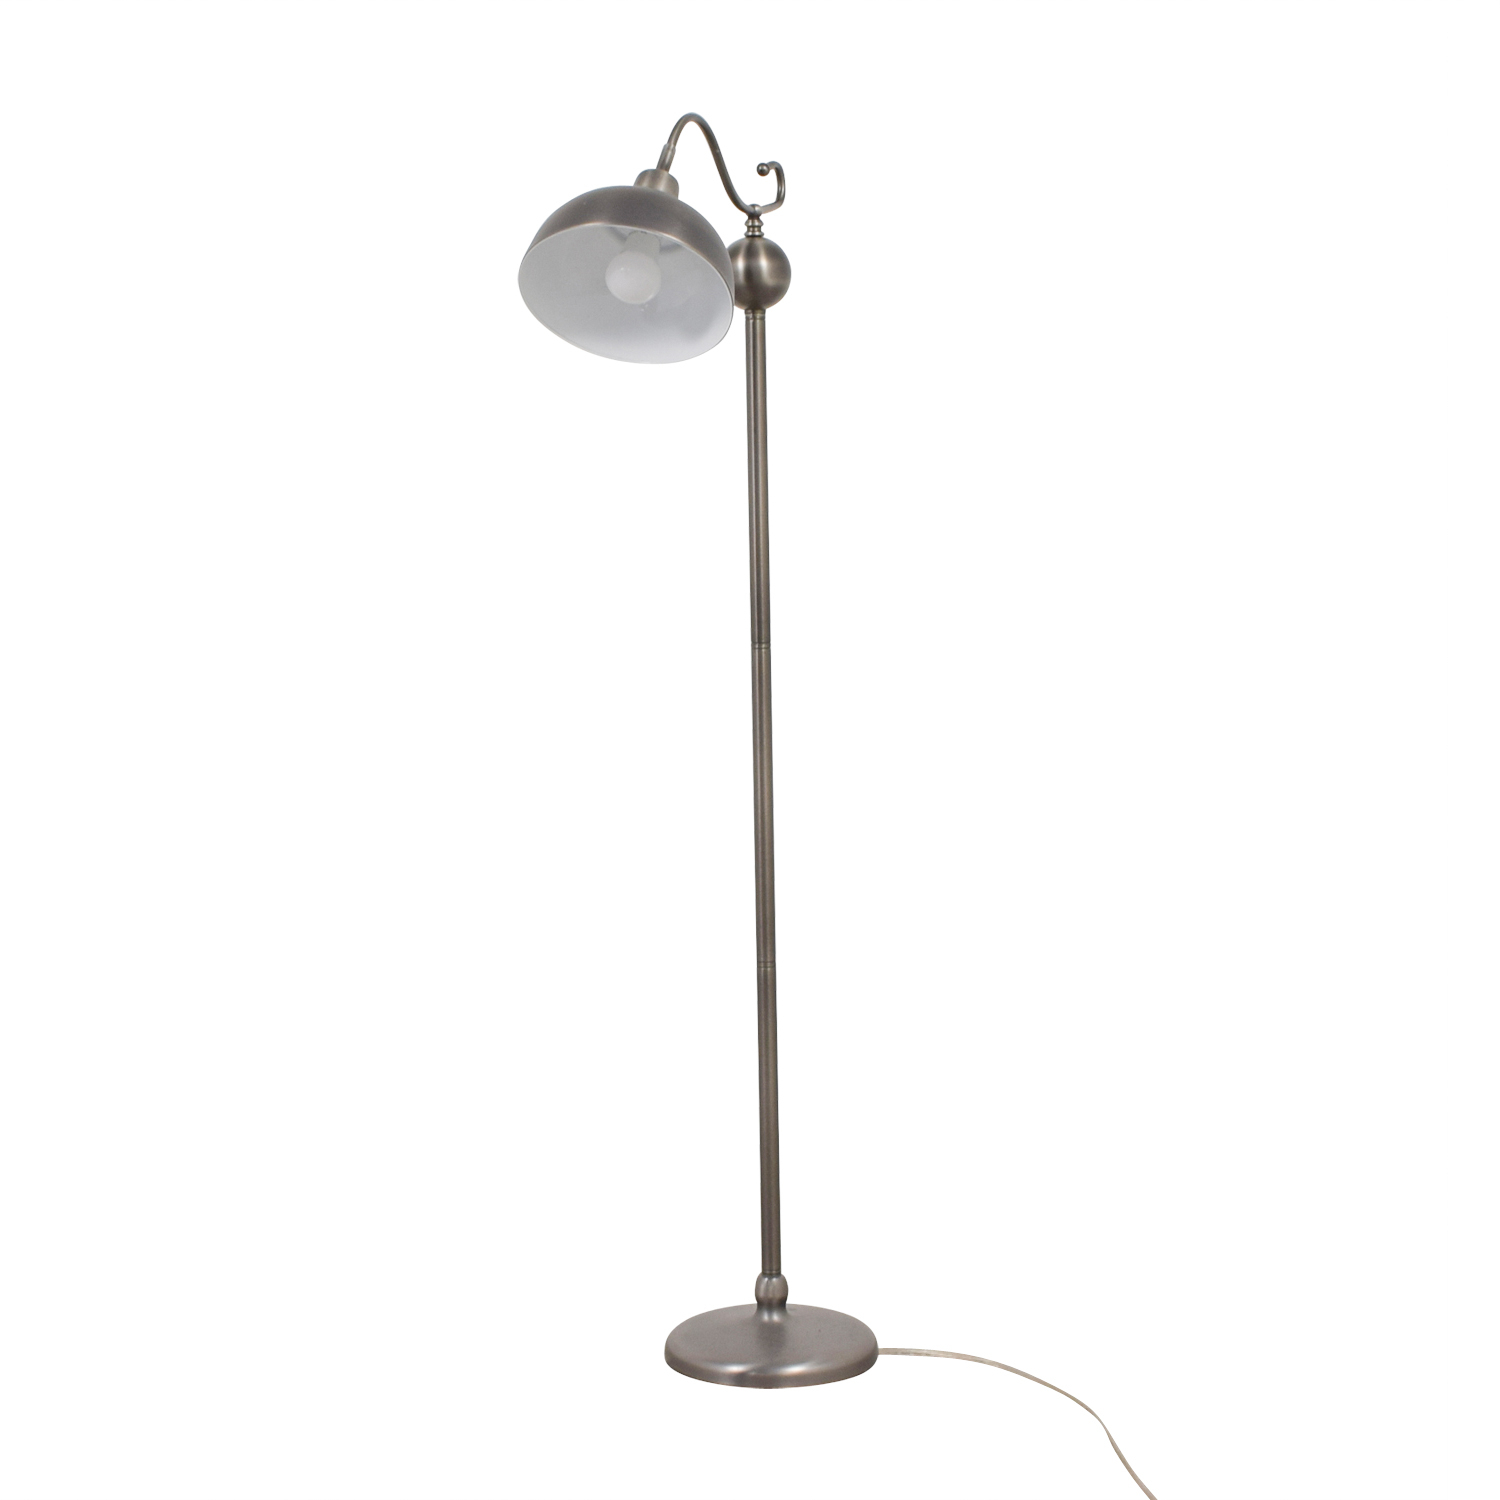 41 Off Urban Outfitters Urban Outfitters Stella Floor Lamp Decor regarding sizing 1500 X 1500